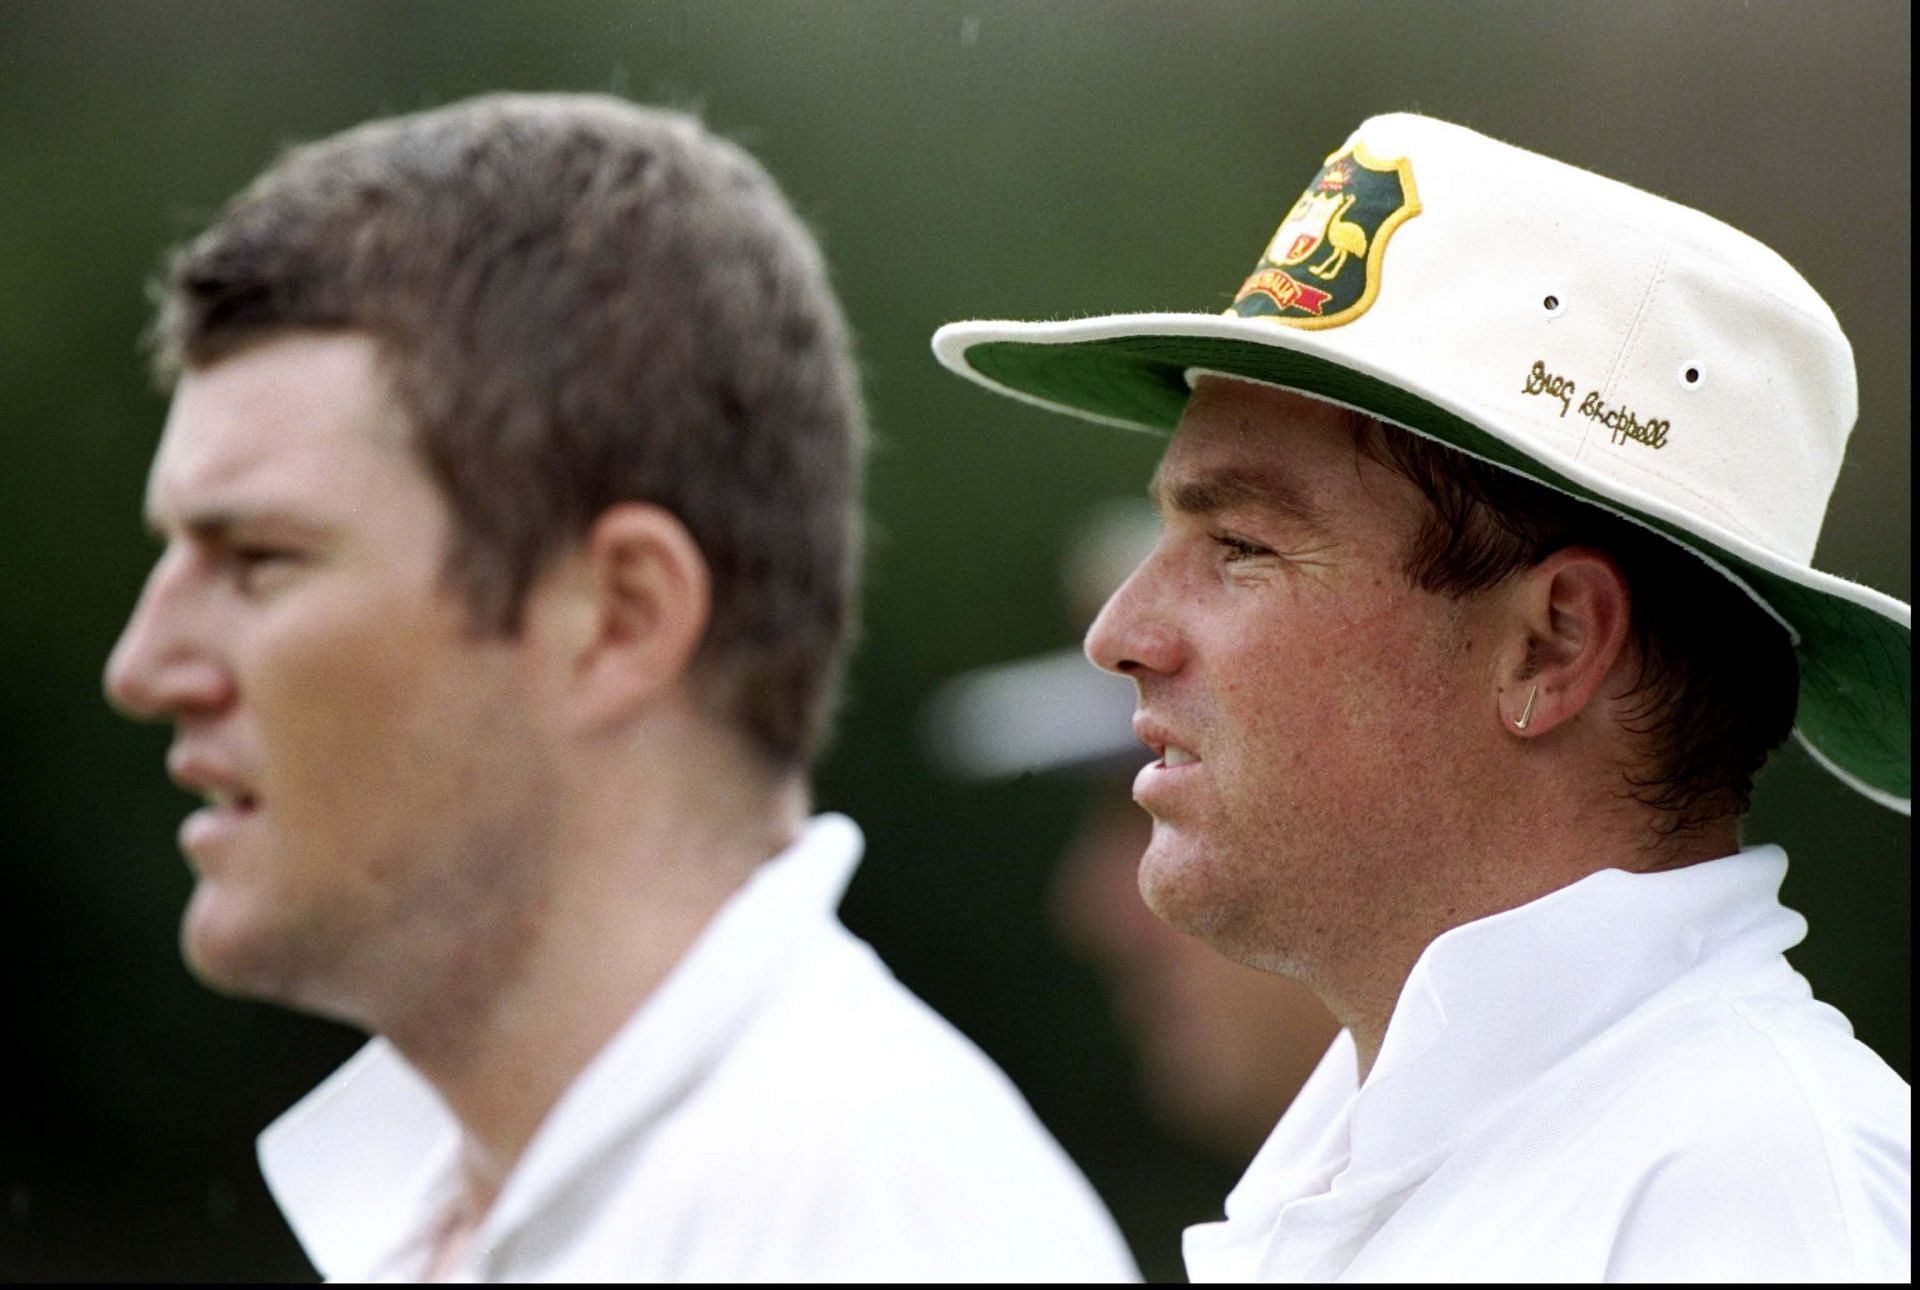 Stuart MacGill&rsquo;s international career suffered as it coincided with the Shane Warne era. Here, the two are seen together during the 5th Ashes Test at the SCG in 1999. Pic: Getty Images